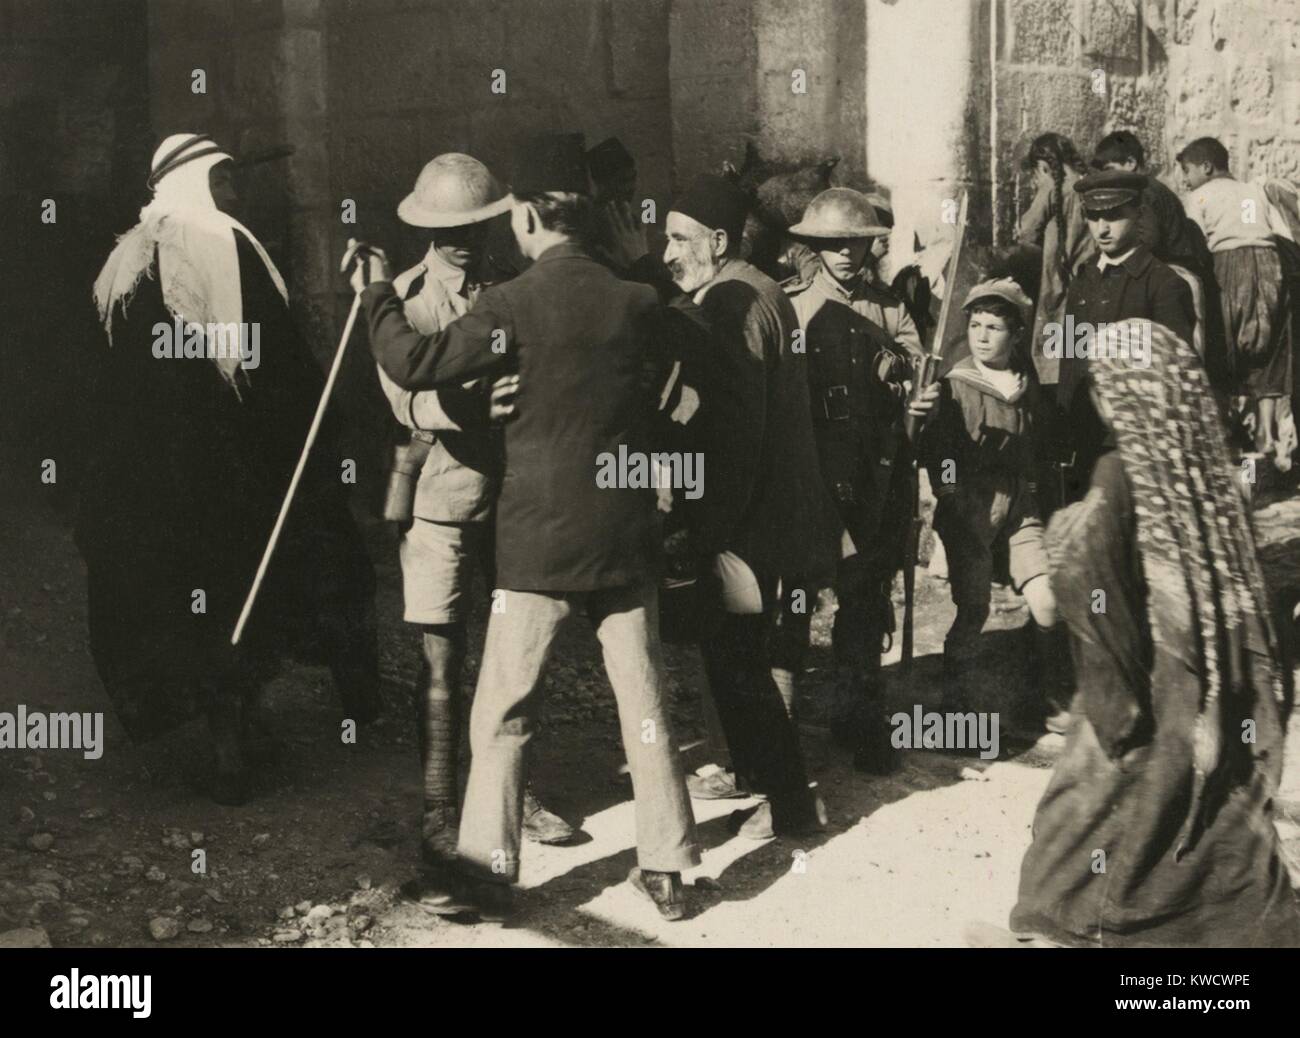 British soldiers search Arab men for weapons in Jerusalem on Nov. 2nd, 1921. The 4th anniversary of the Balfour Proclamation, was a day of Arab protest in Palestine (BSLOC 2017 1 189) Stock Photo